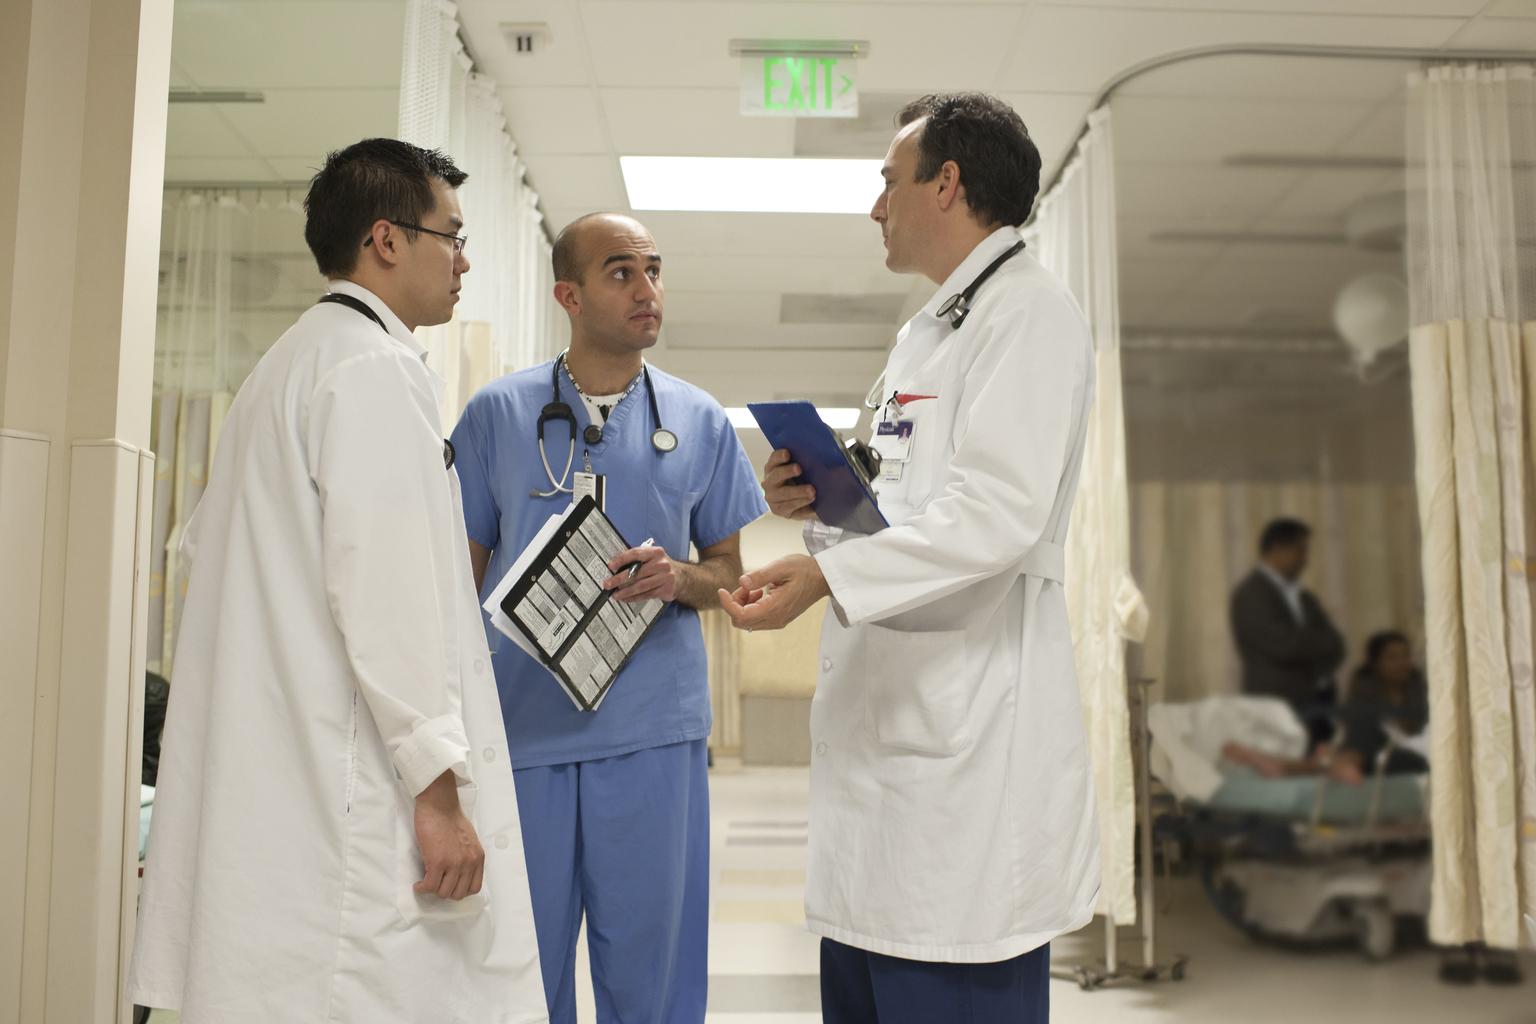 Three male doctors in discussion in emergency room.